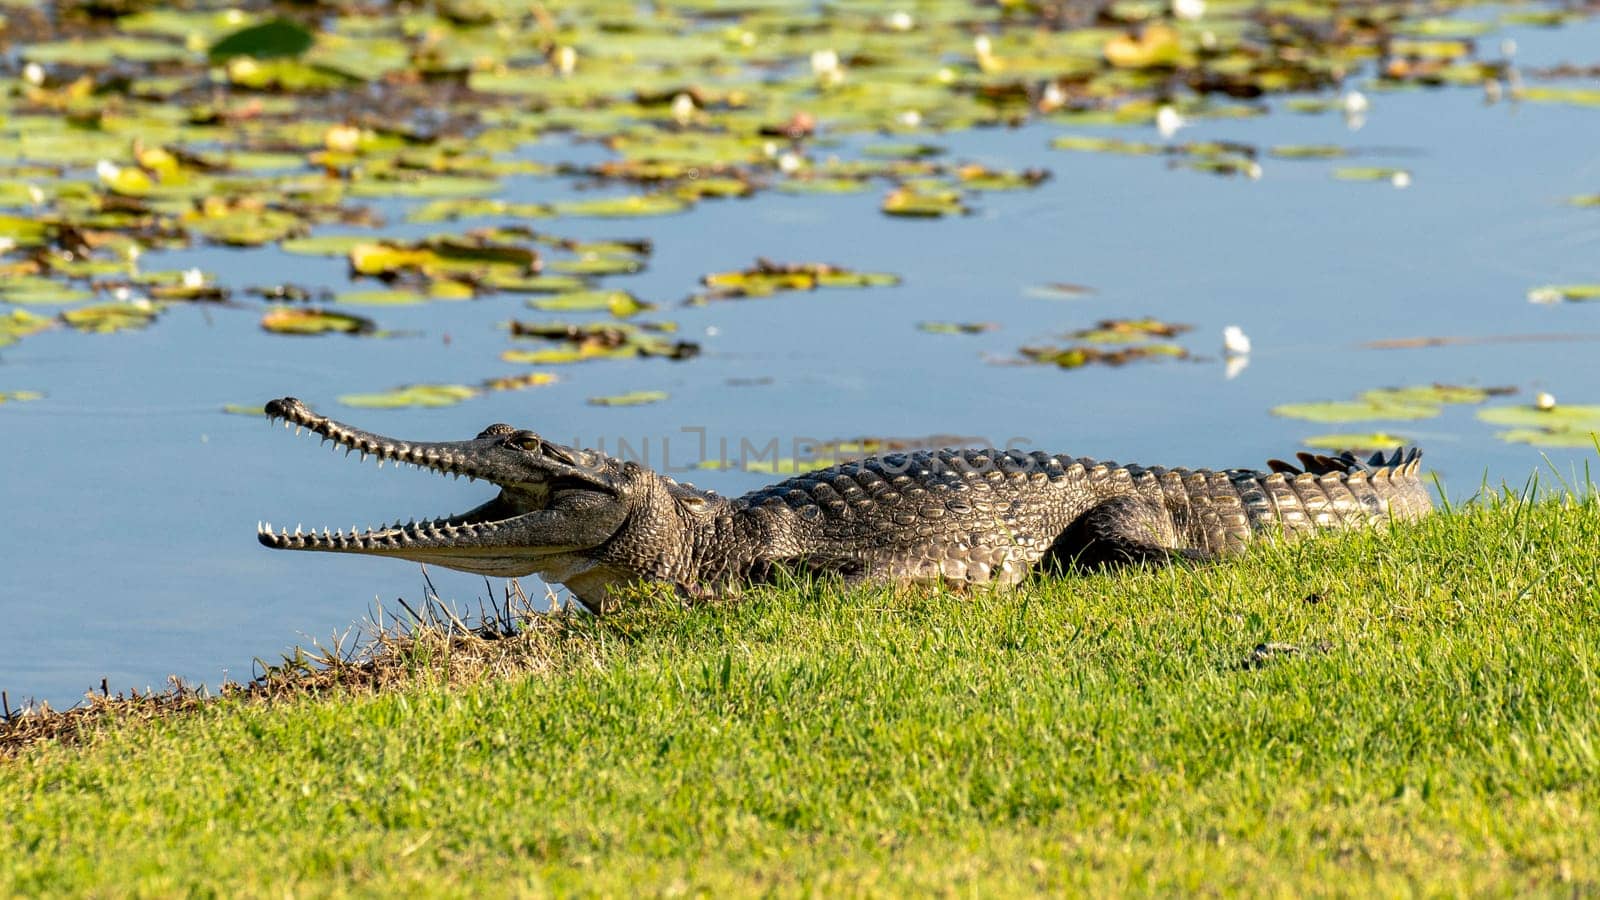 Australian Johnstones freshie croc lays with mouth open to regulate temperature on grass near water.